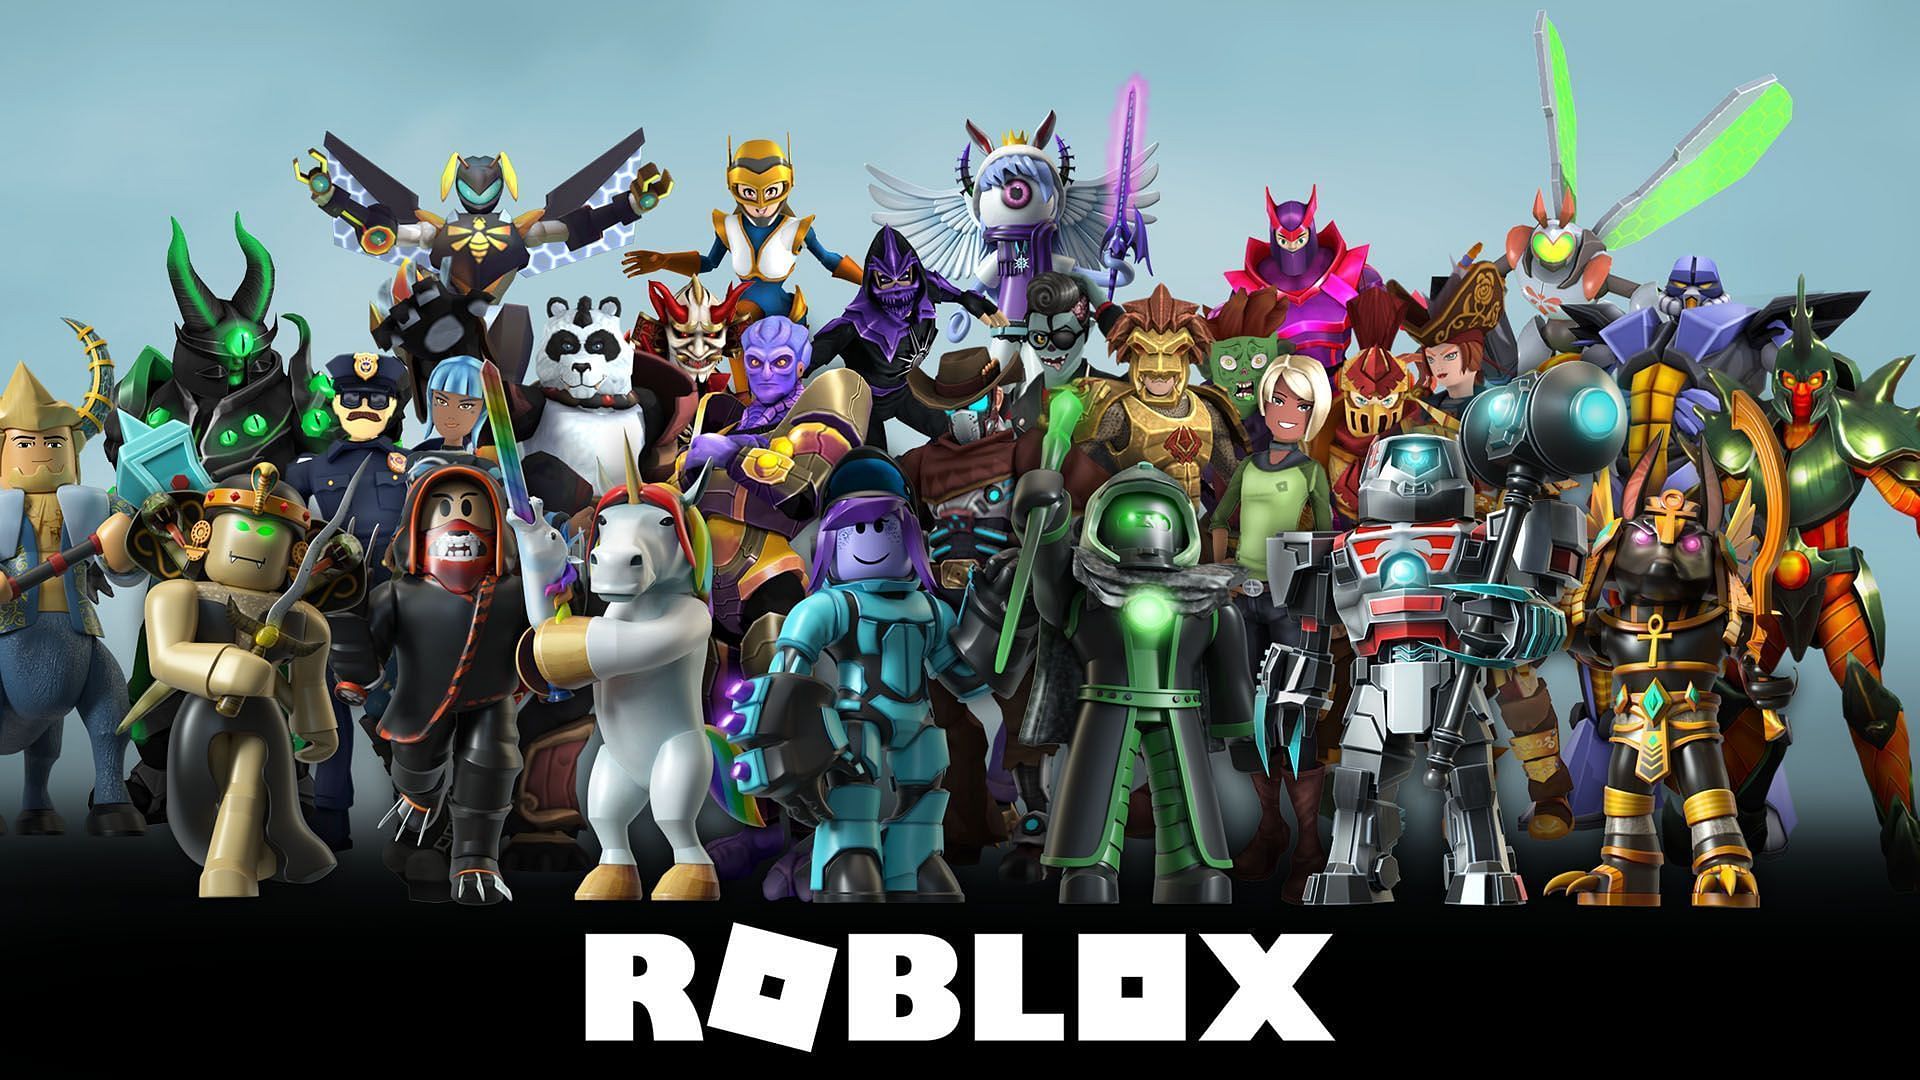 Download Roblox wallpaper by Forza_man - 67 - Free on ZEDGE™ now. Browse  millions of popular gala…